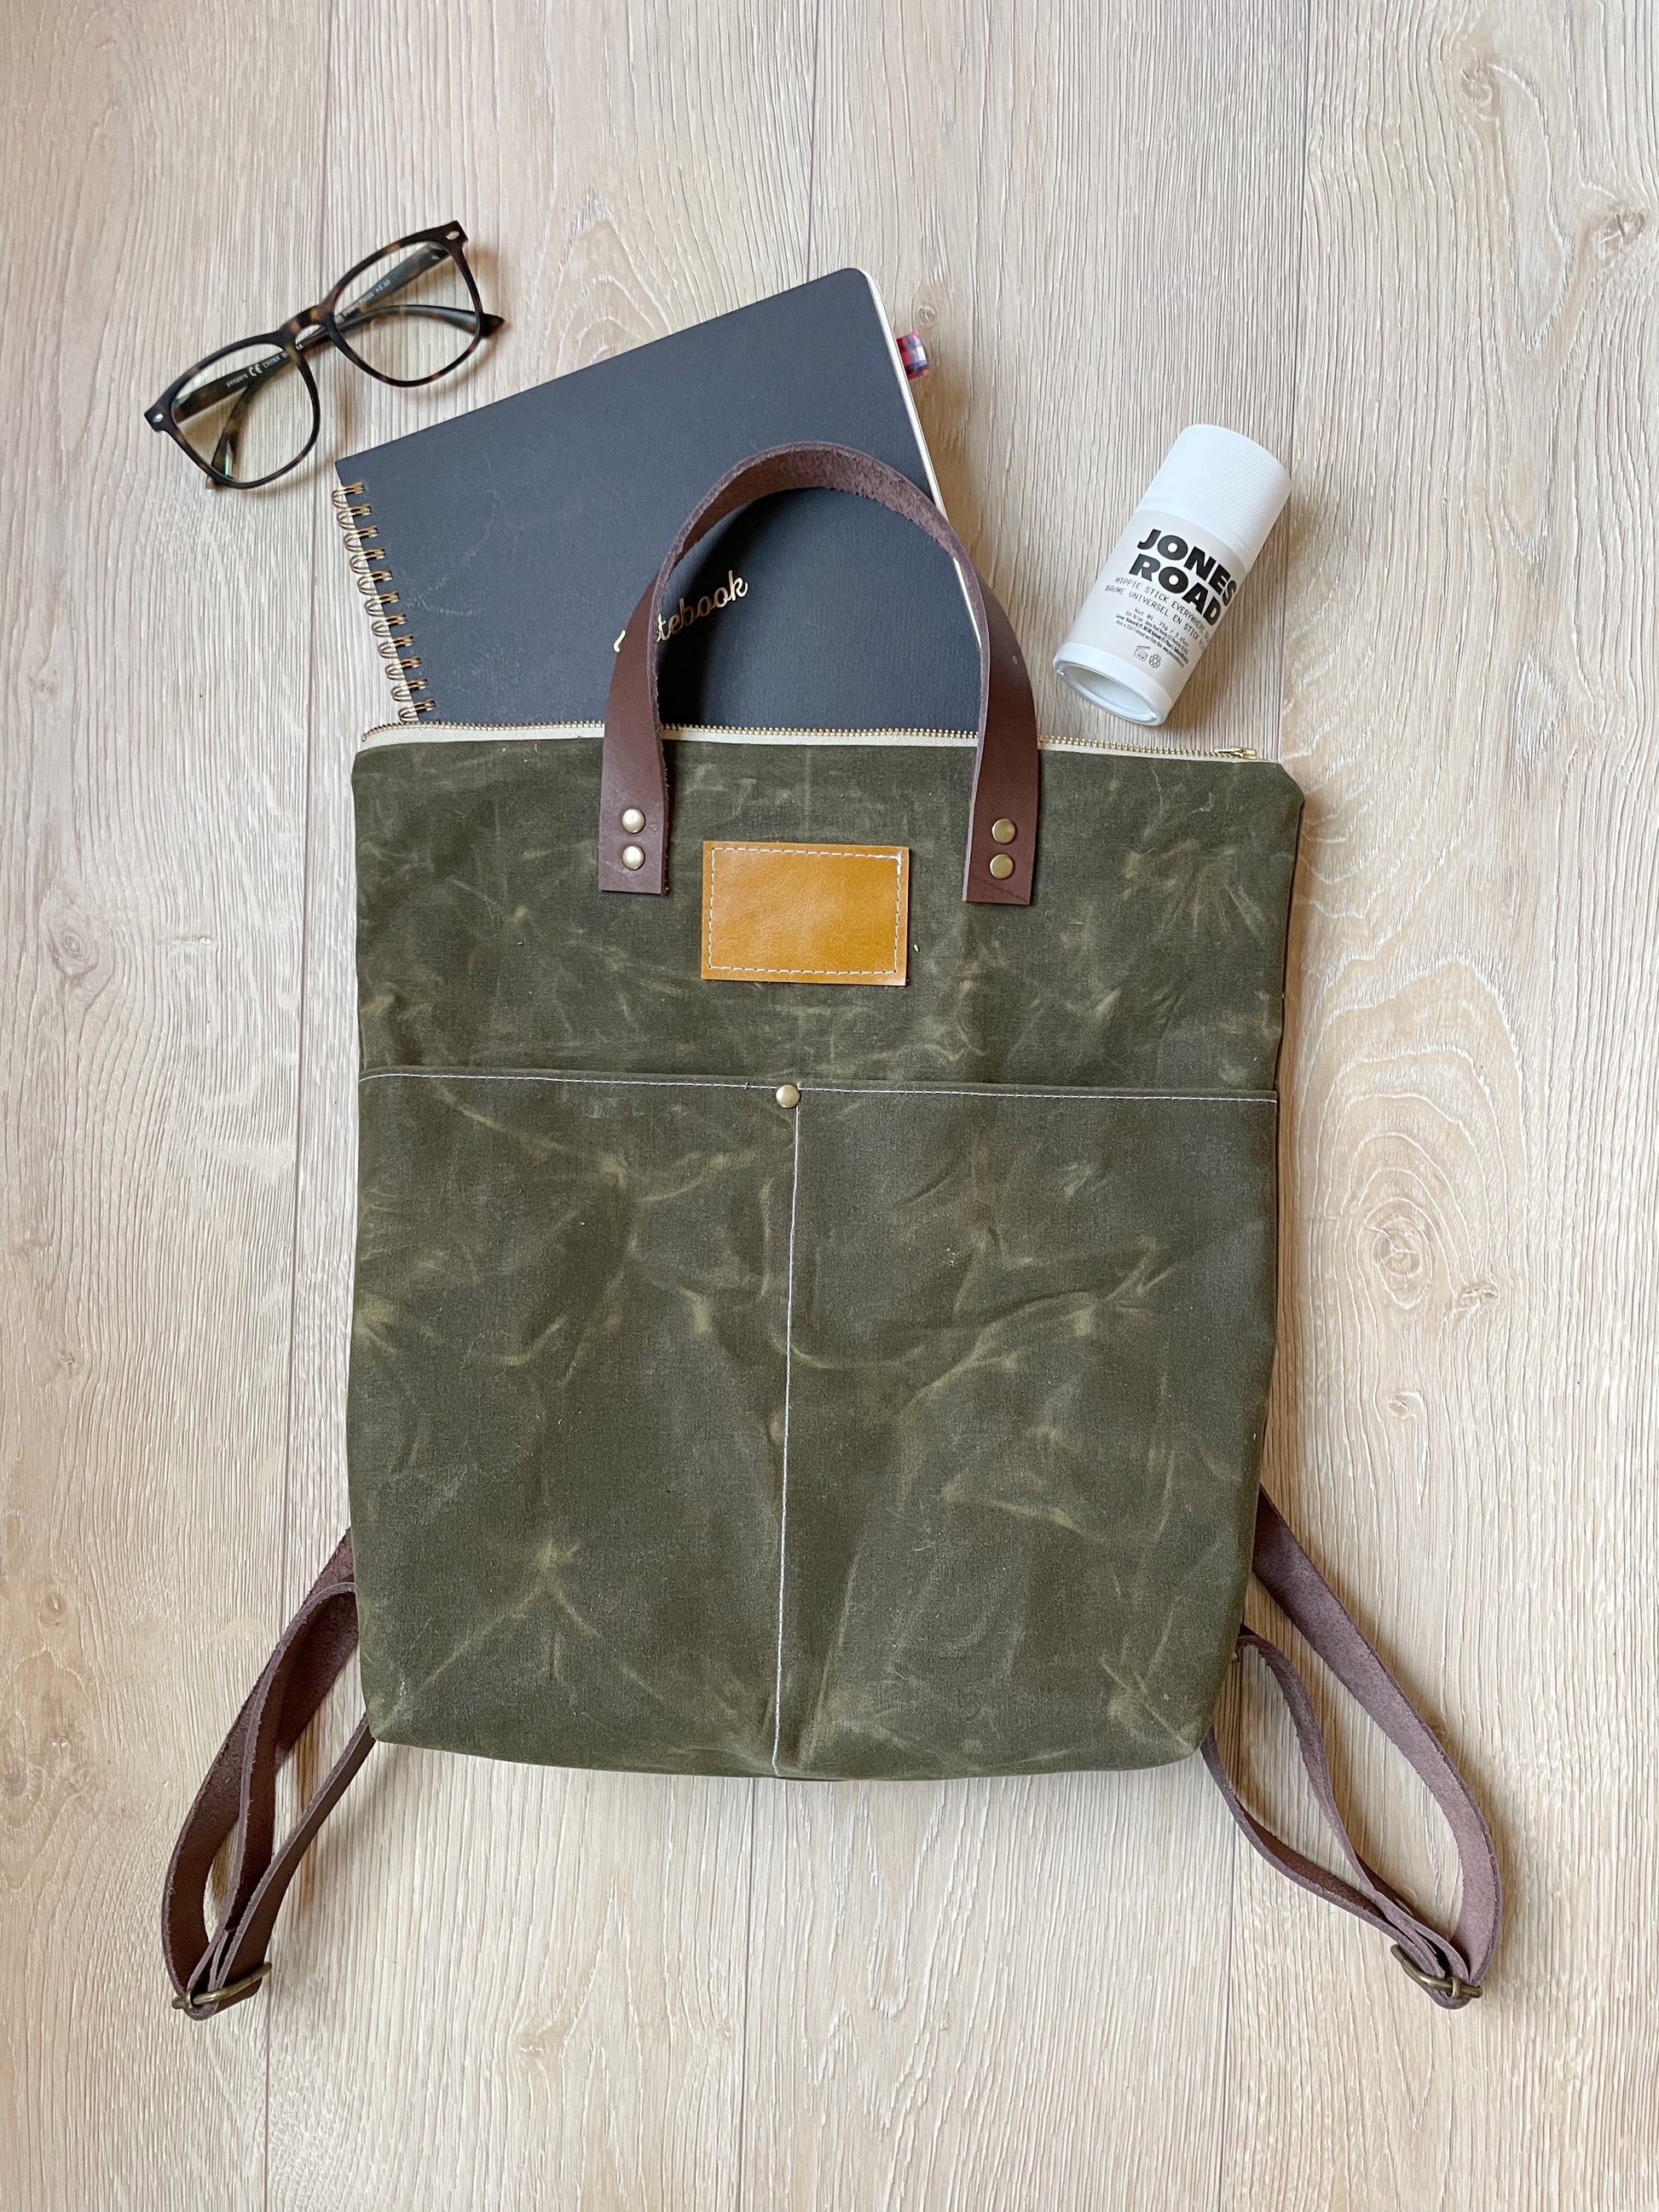 Olive Green Canvas Backpack